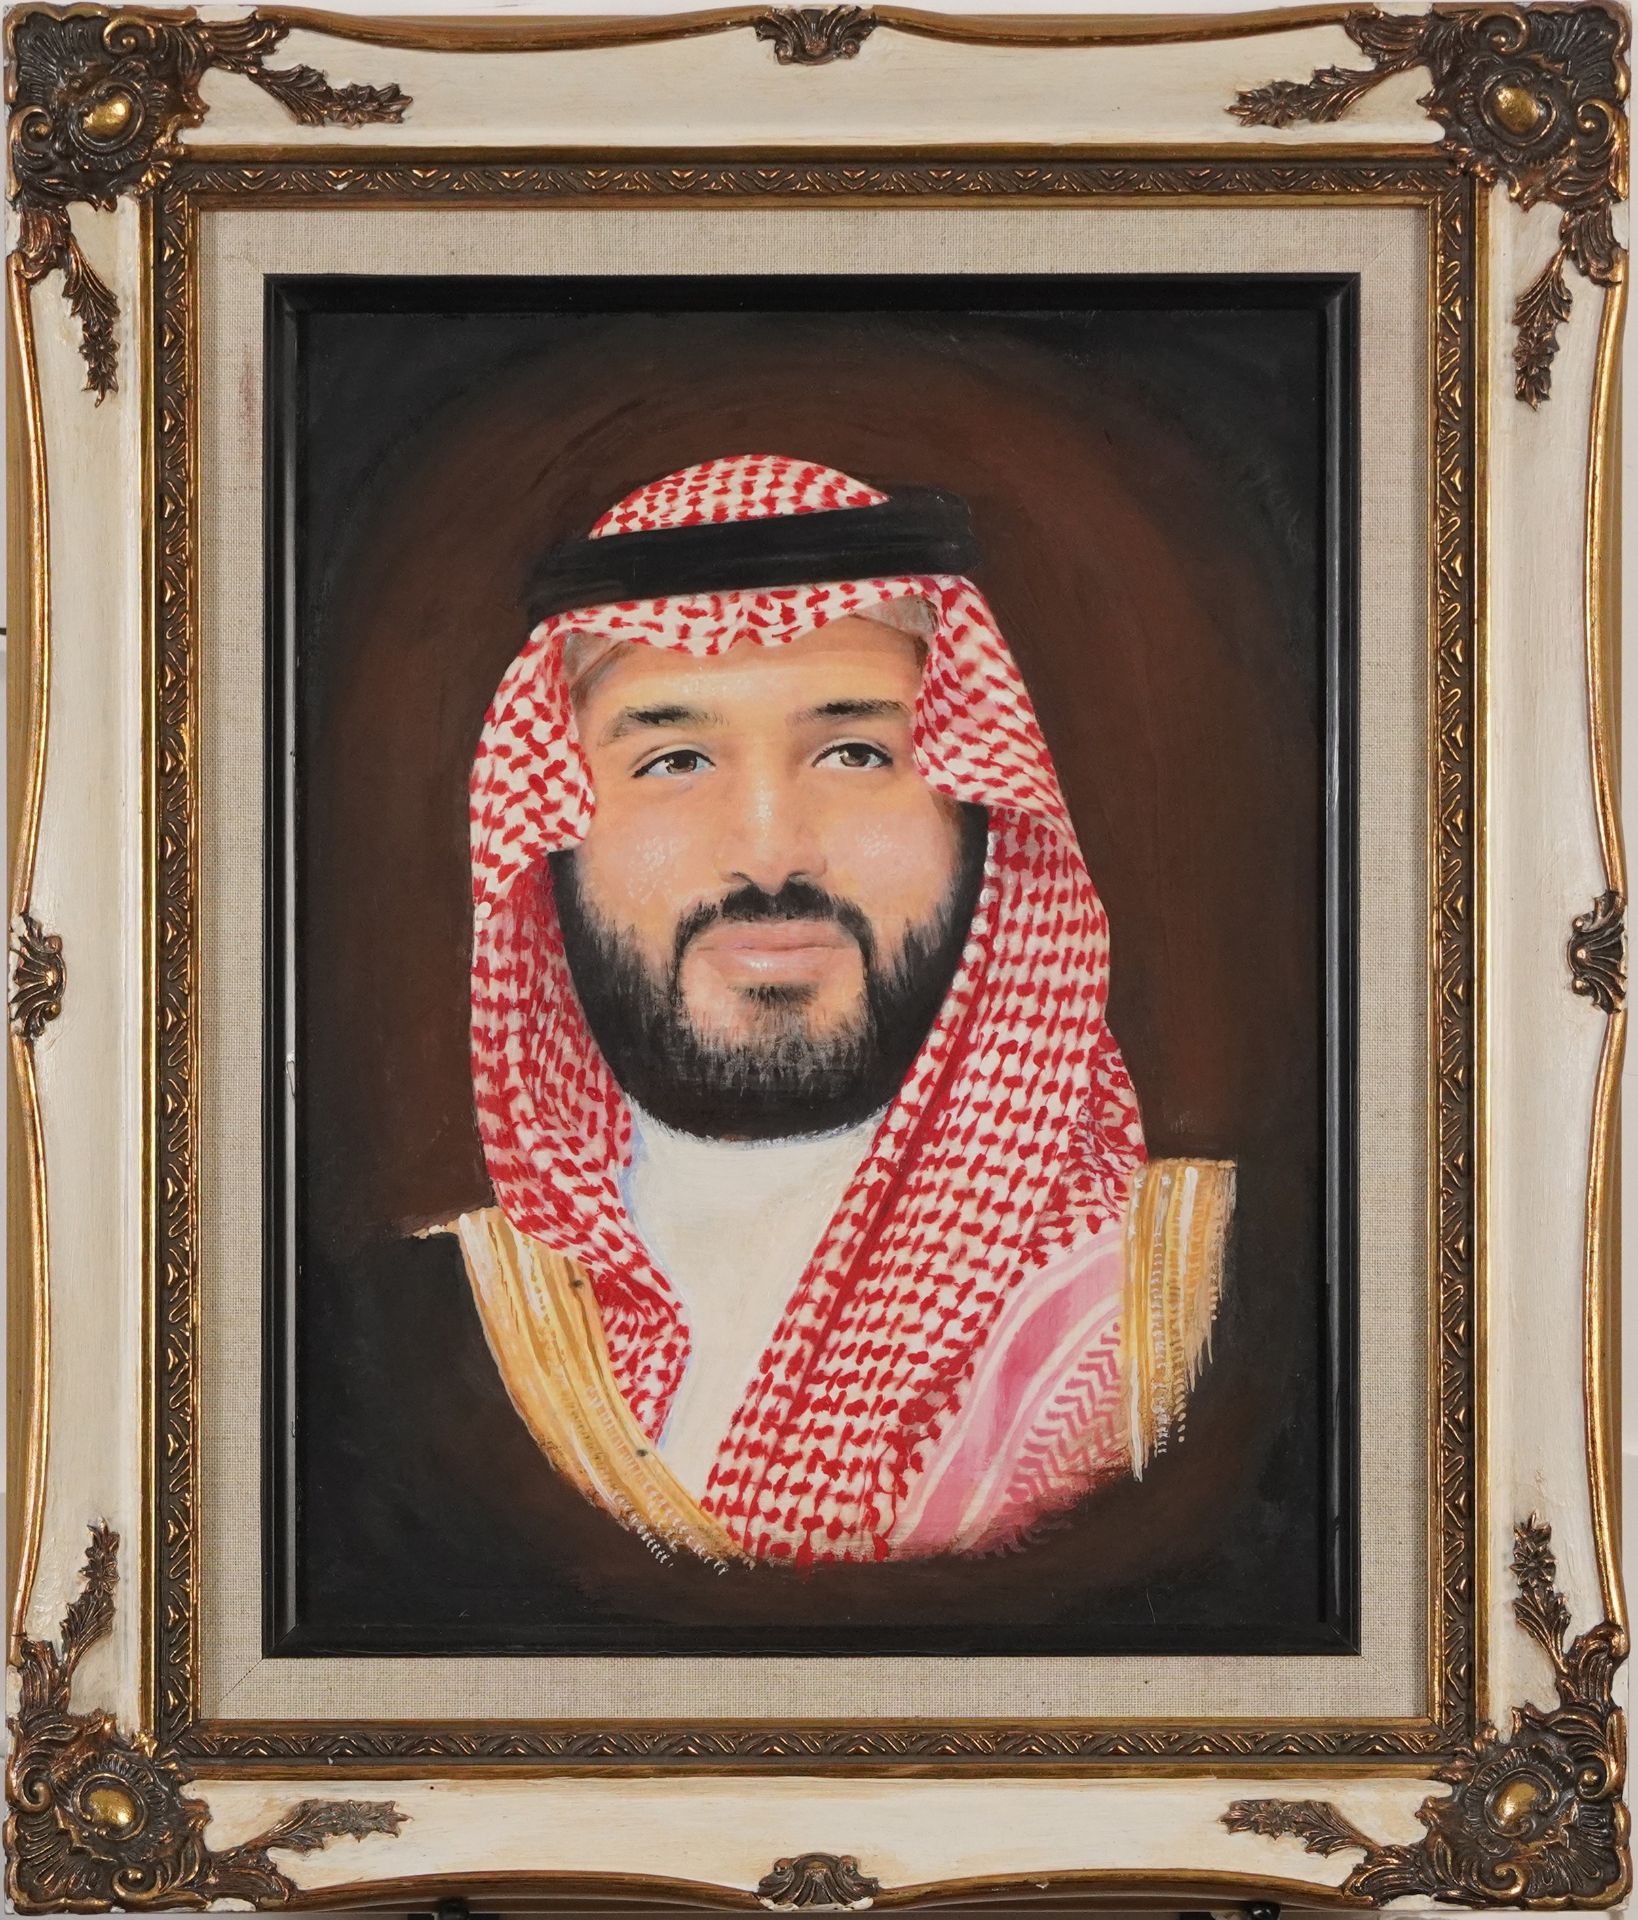 Portraits of Salman of Saudi Arabia, two pictures, framed, the largest 34cm x 26.5cm excluding the - Image 6 of 7